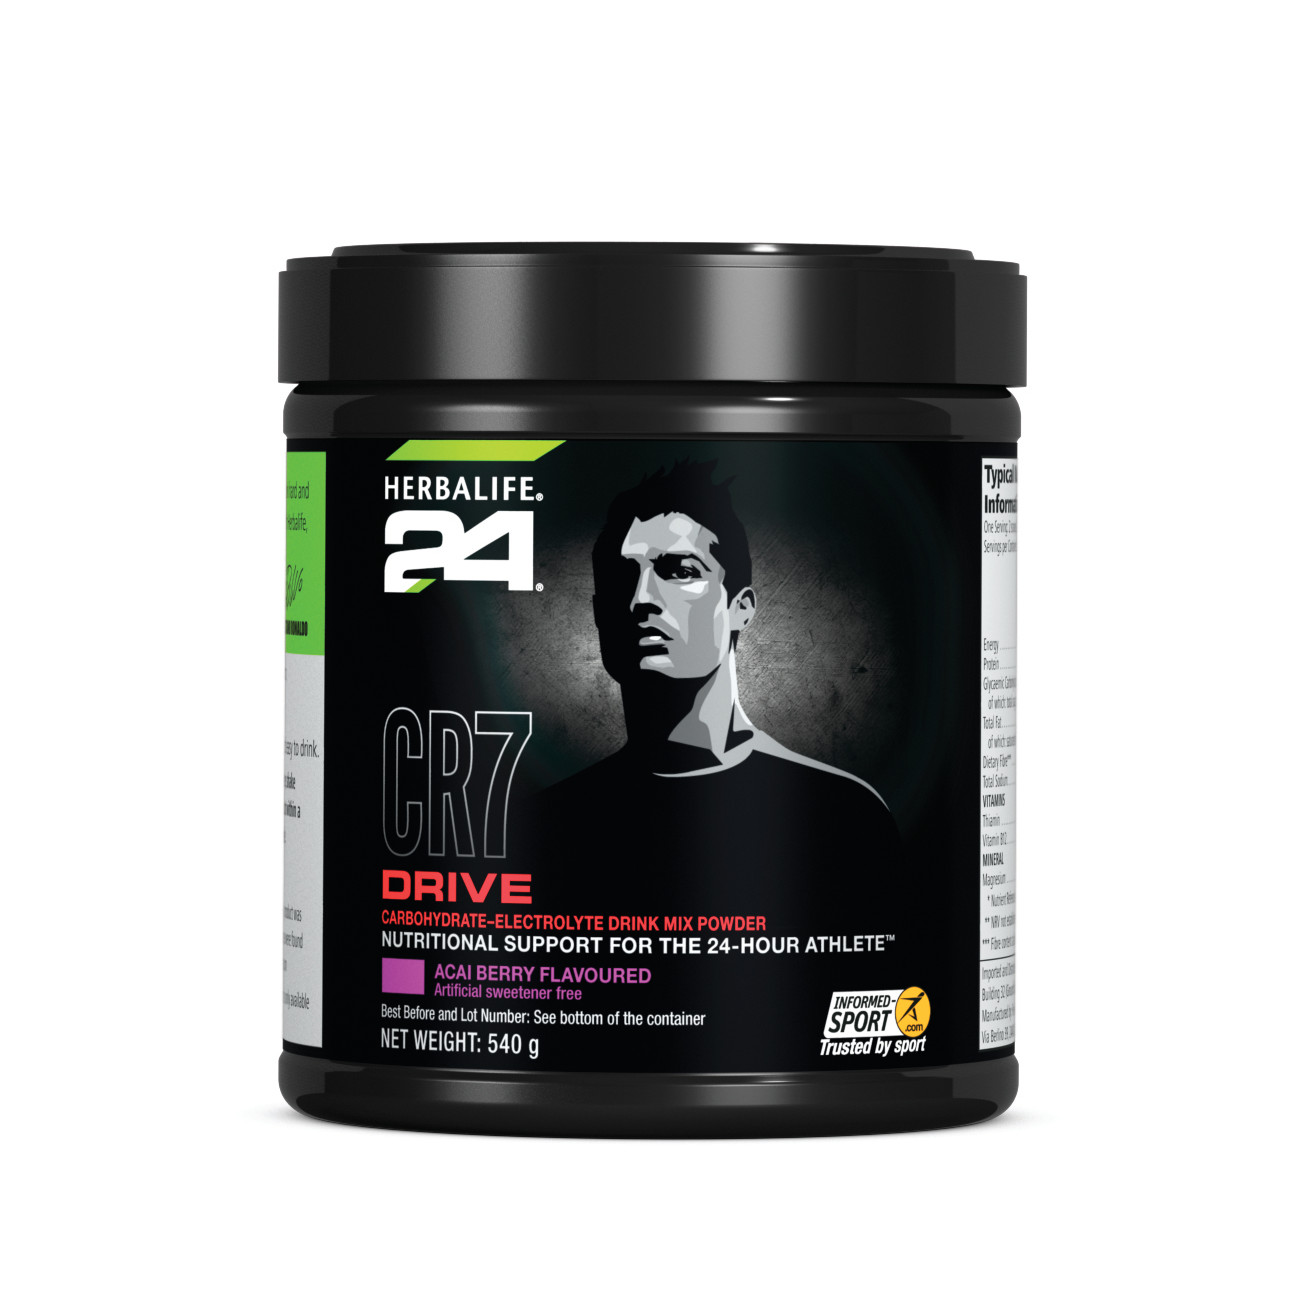 Herbalife24® CR7 Drive Carbohydrate-Electrolyte Drink Mix Acai Berry Flavoured 540 g product shot